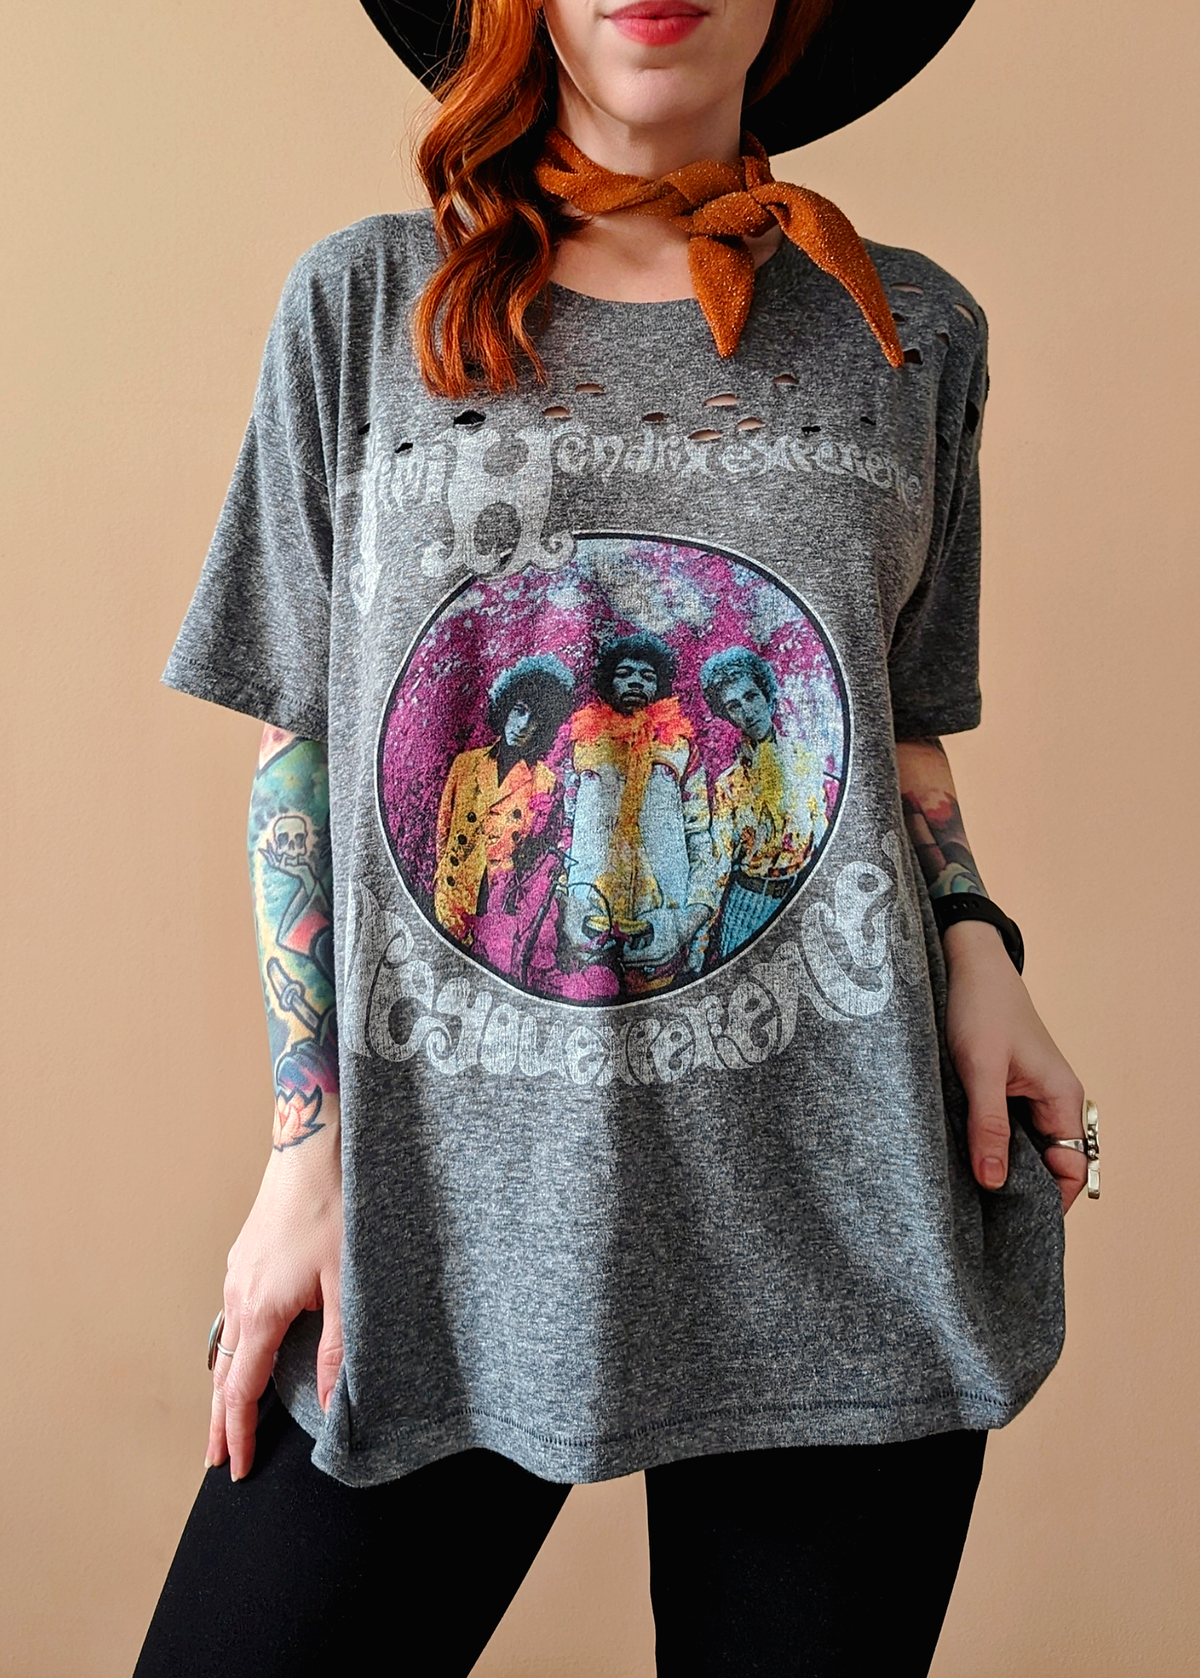 60s inspired Jimi Hendrix Experience Are You Experienced slouchy fit grey tee by daydreamer la, officially licensed and made in california